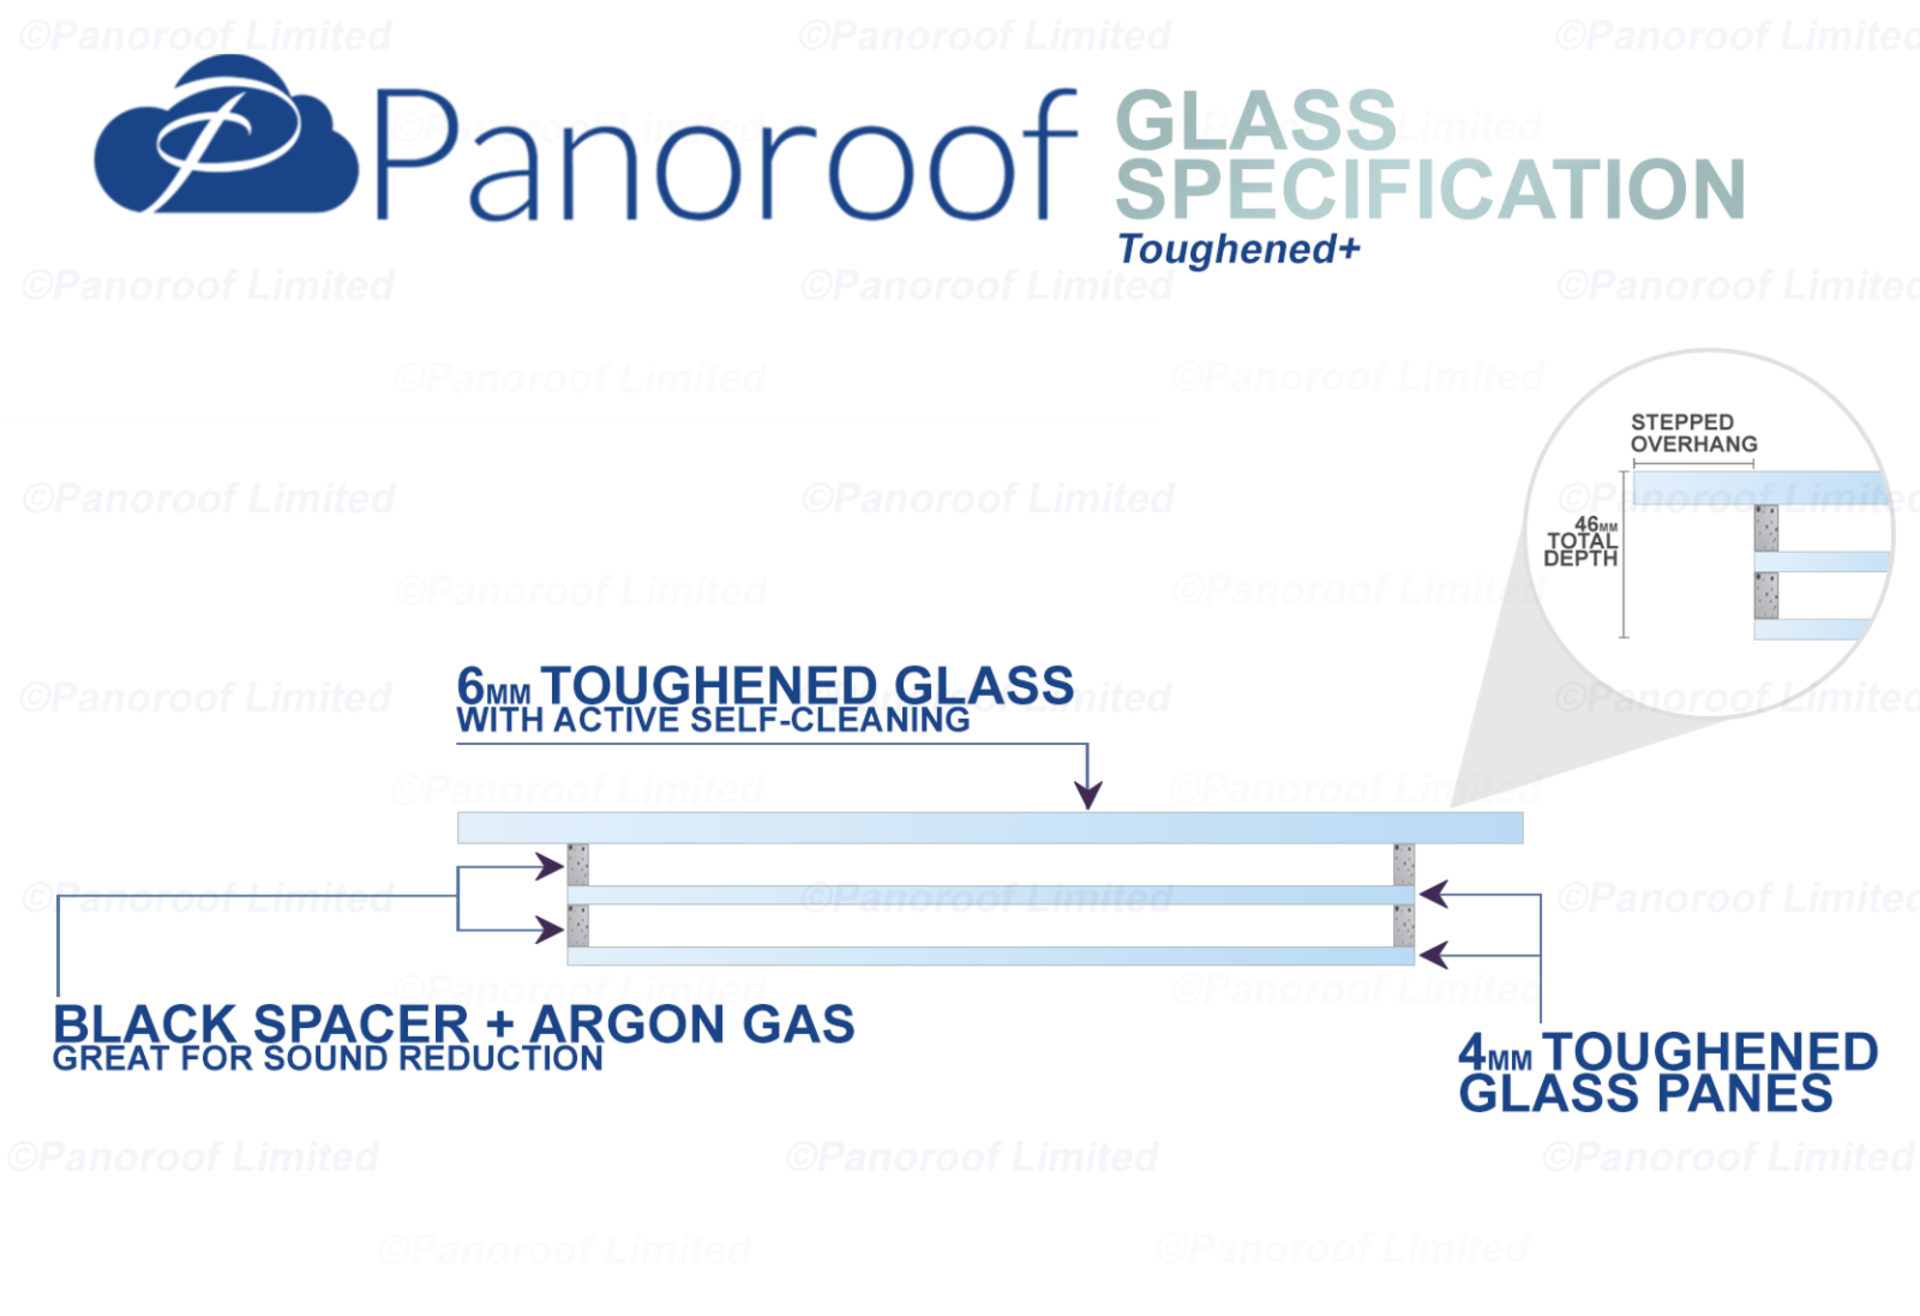 """Panoroof Triple Glazed Self Cleaning 800x1800mm (inside Size Visable glass area) Seamless Glass - Image 4 of 6